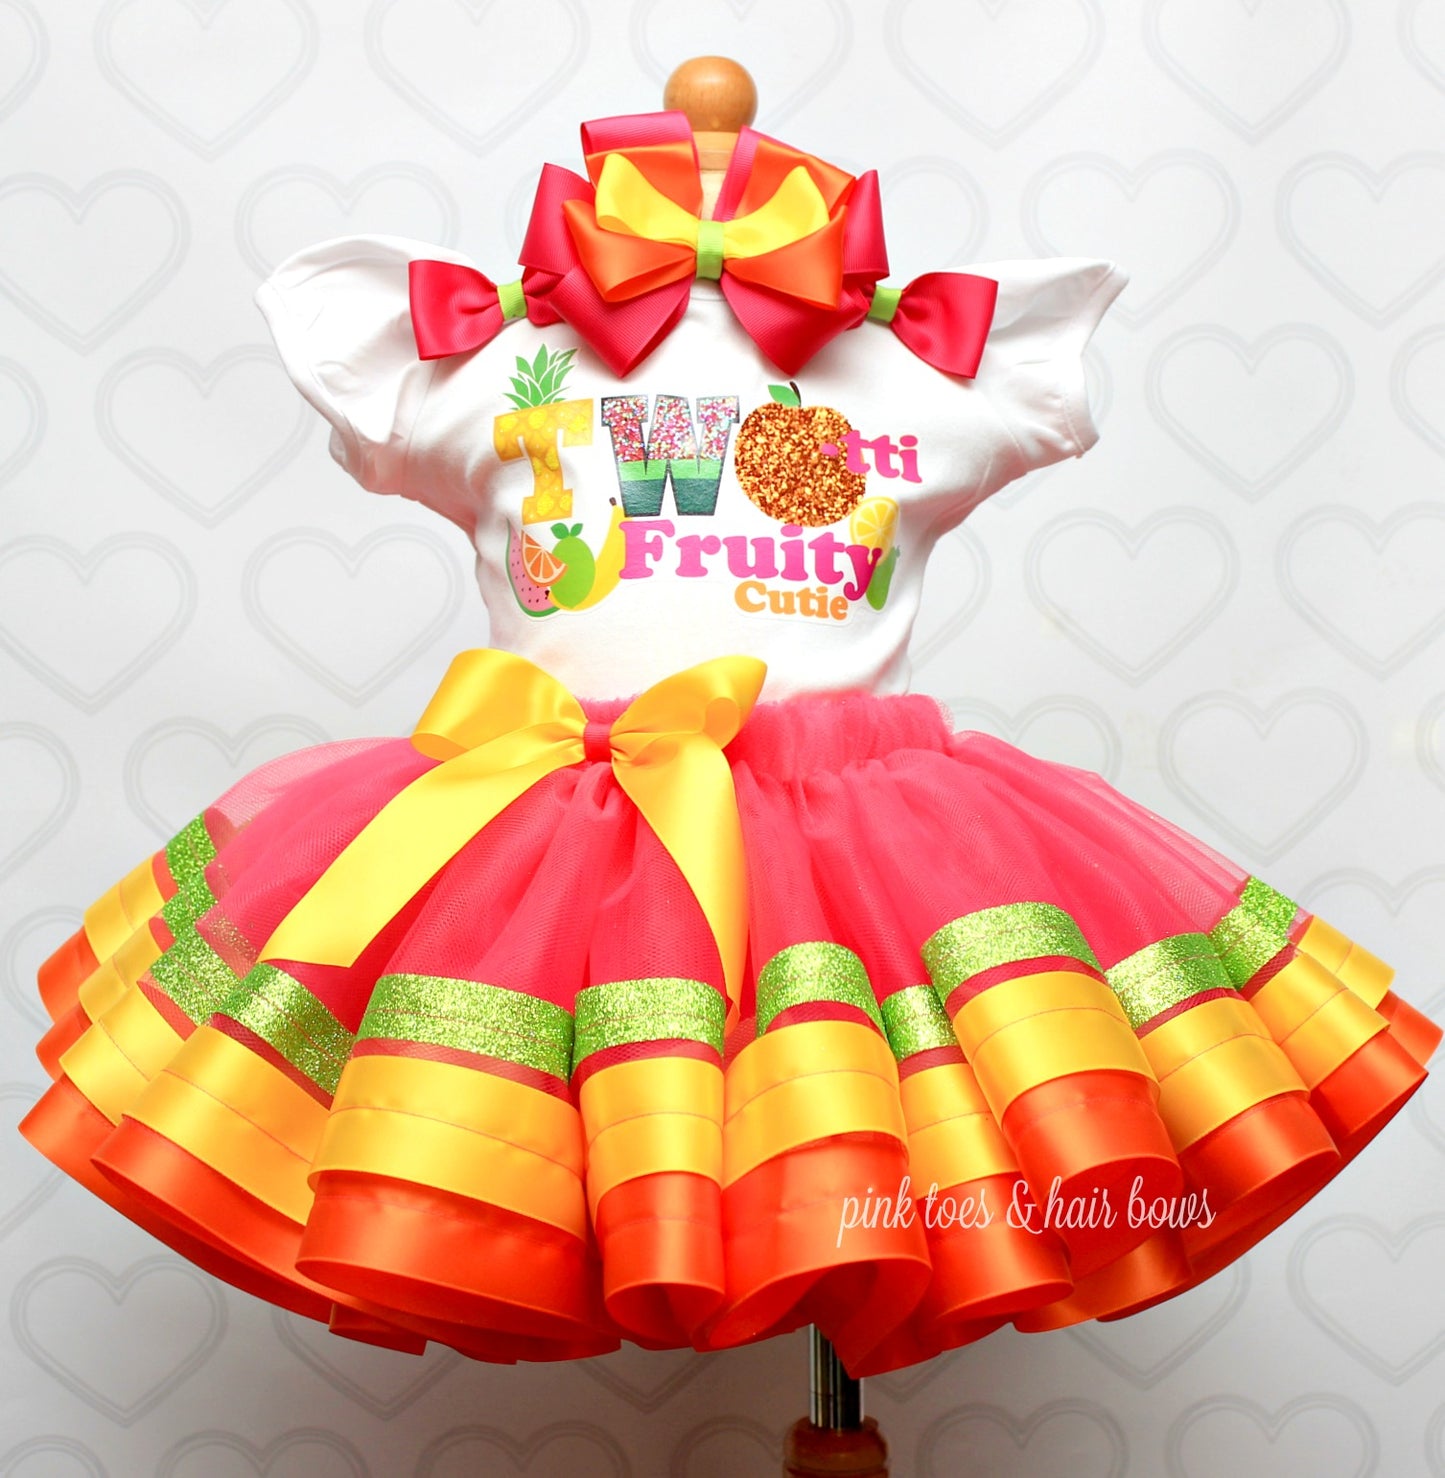 Twoty Fruity tutu set-Twoty Fruity outfit-Twoty Fruity dress-Twotti Fruity tutu set